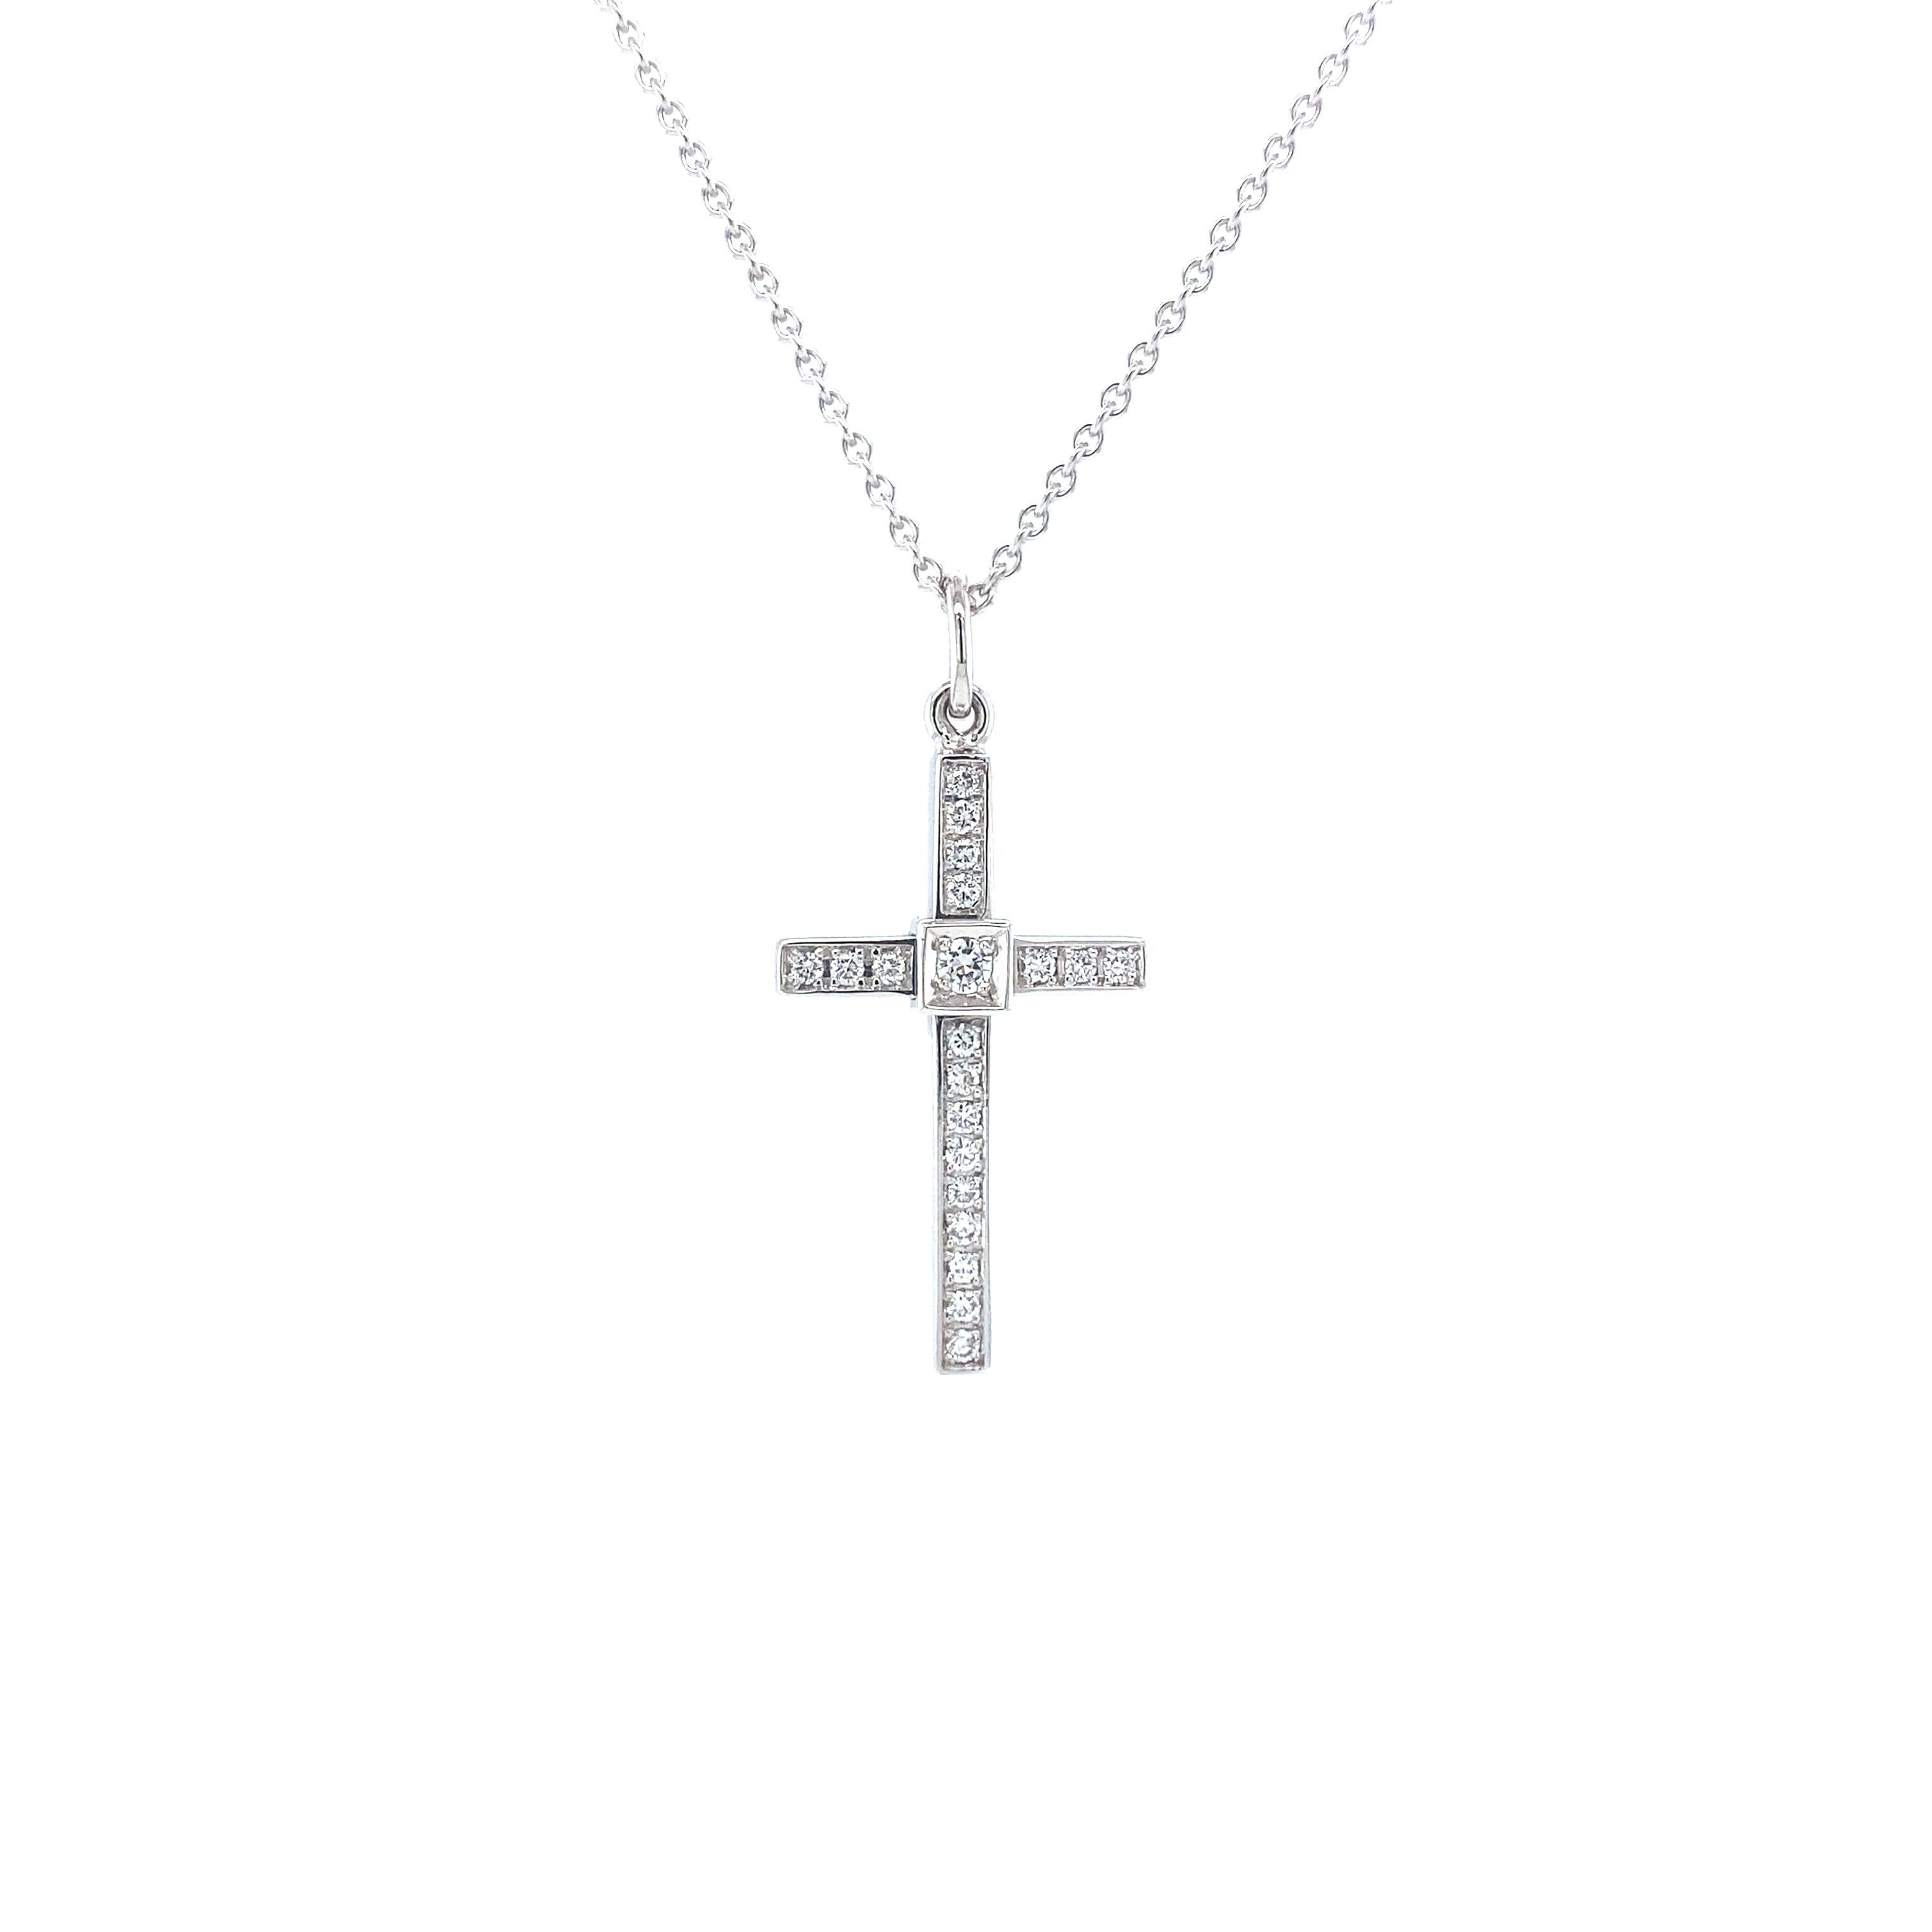 Victor Mayer cross pendant 18k white gold, Hallmark Collection, 21 diamonds, total 0.25 ct, H VS, height with eyelet app. 42.5 mm

About the creator Victor Mayer
Victor Mayer is internationally renowned for elegant timeless designs and unrivalled